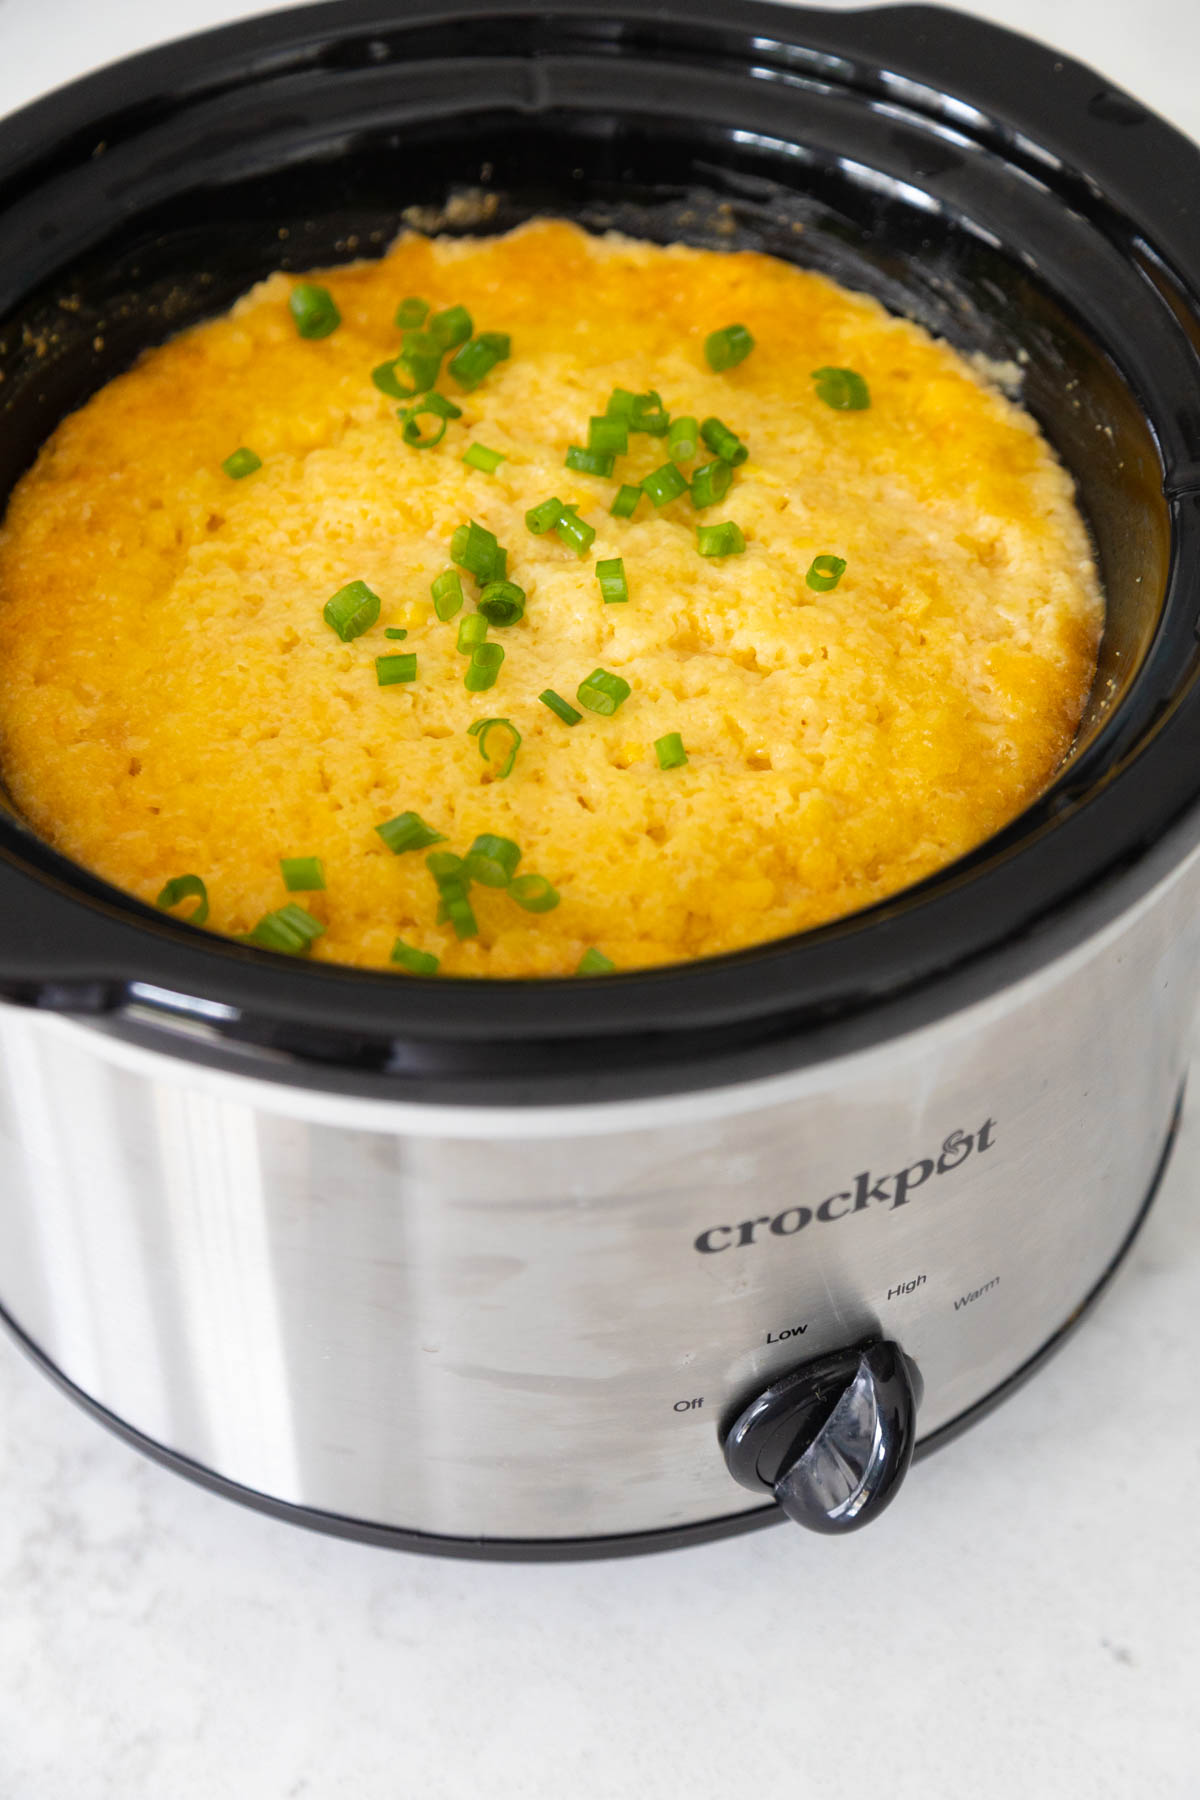 The finished corn casserole is in the Crock Pot and has chopped green onions over the top.